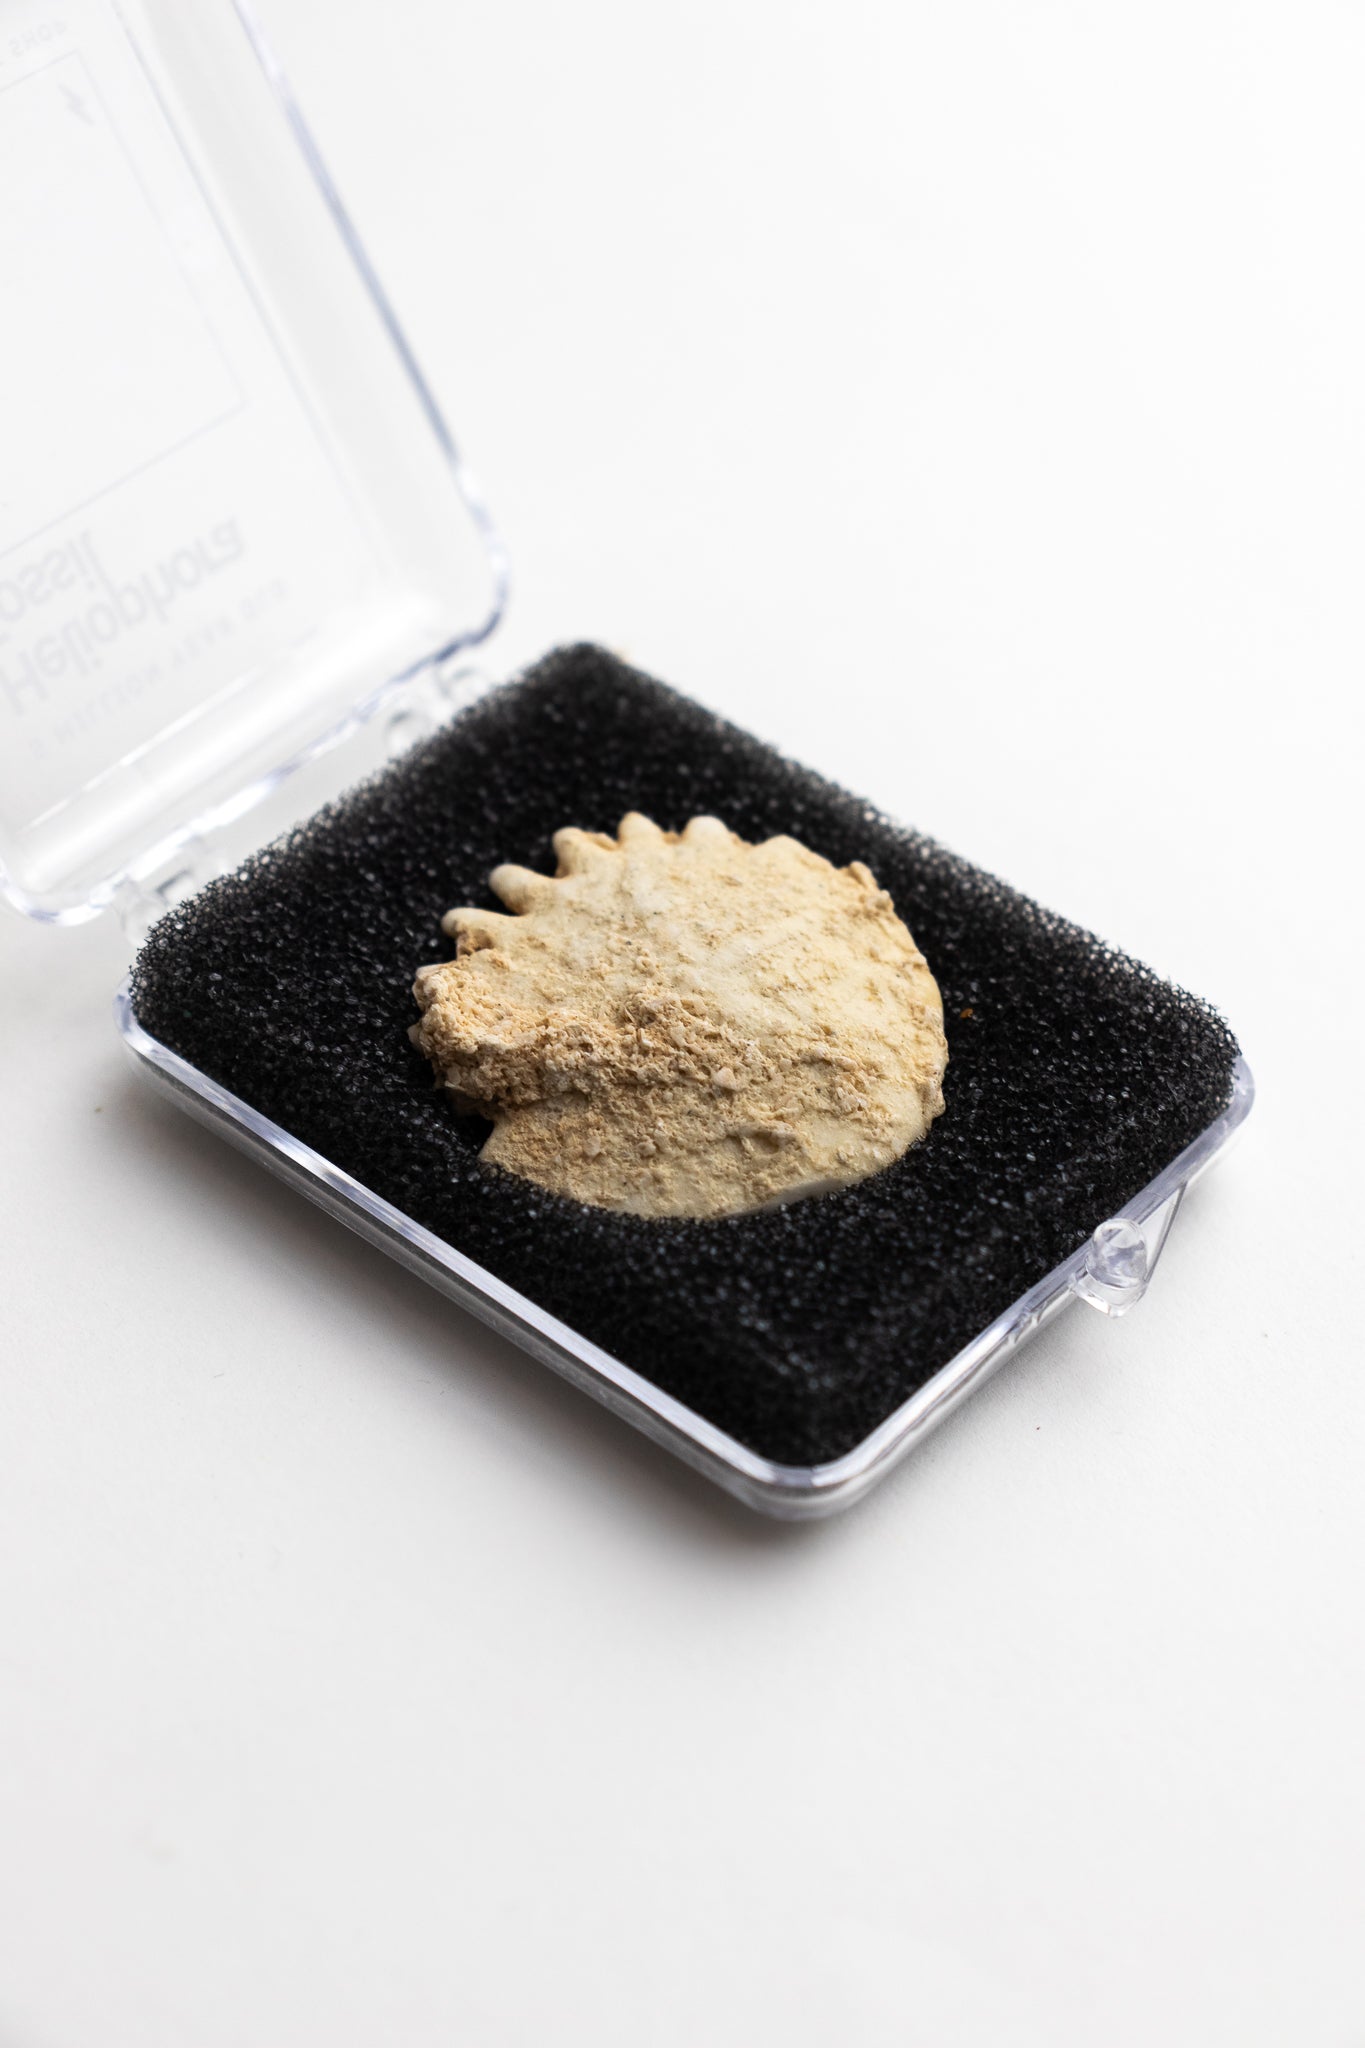 Frilled Echinoid (Heliophora) - Stemcell Science Shop